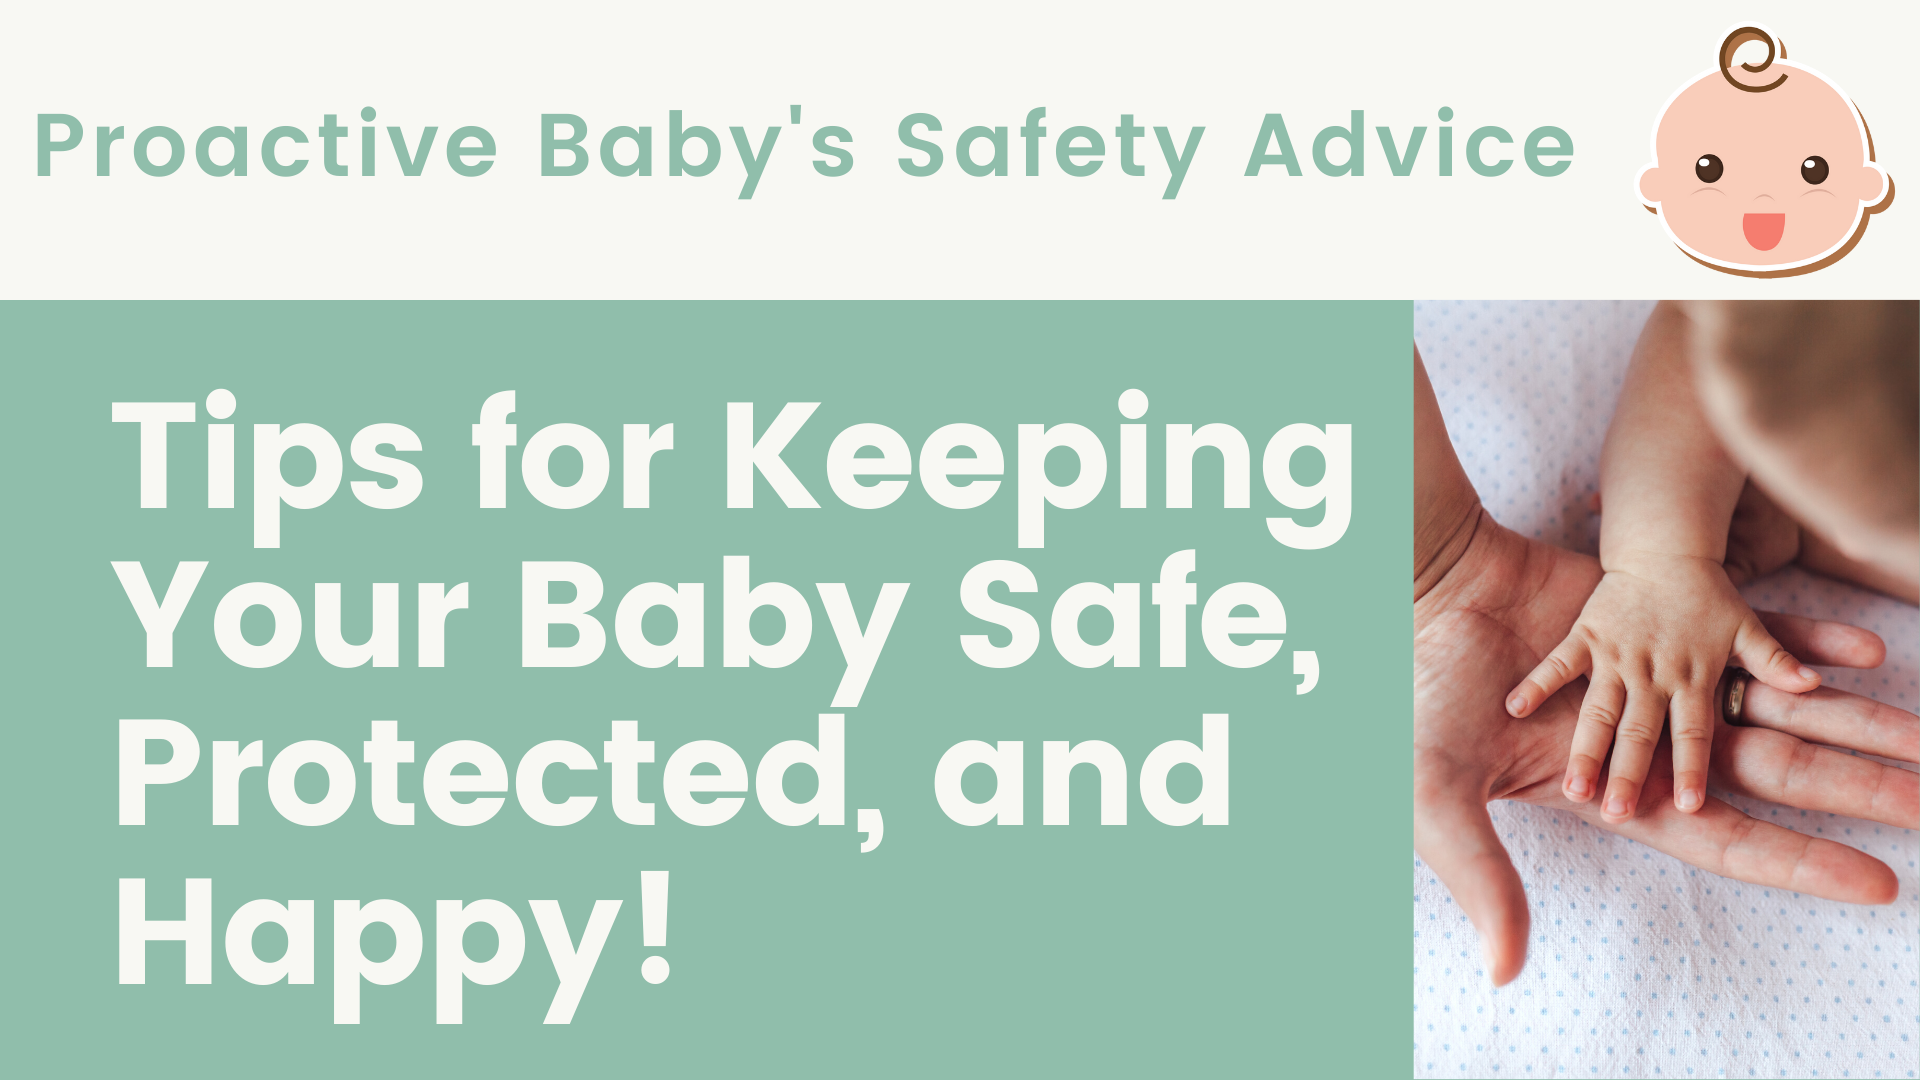 Tips for Keeping Your Baby Safe, Protected and Happy!